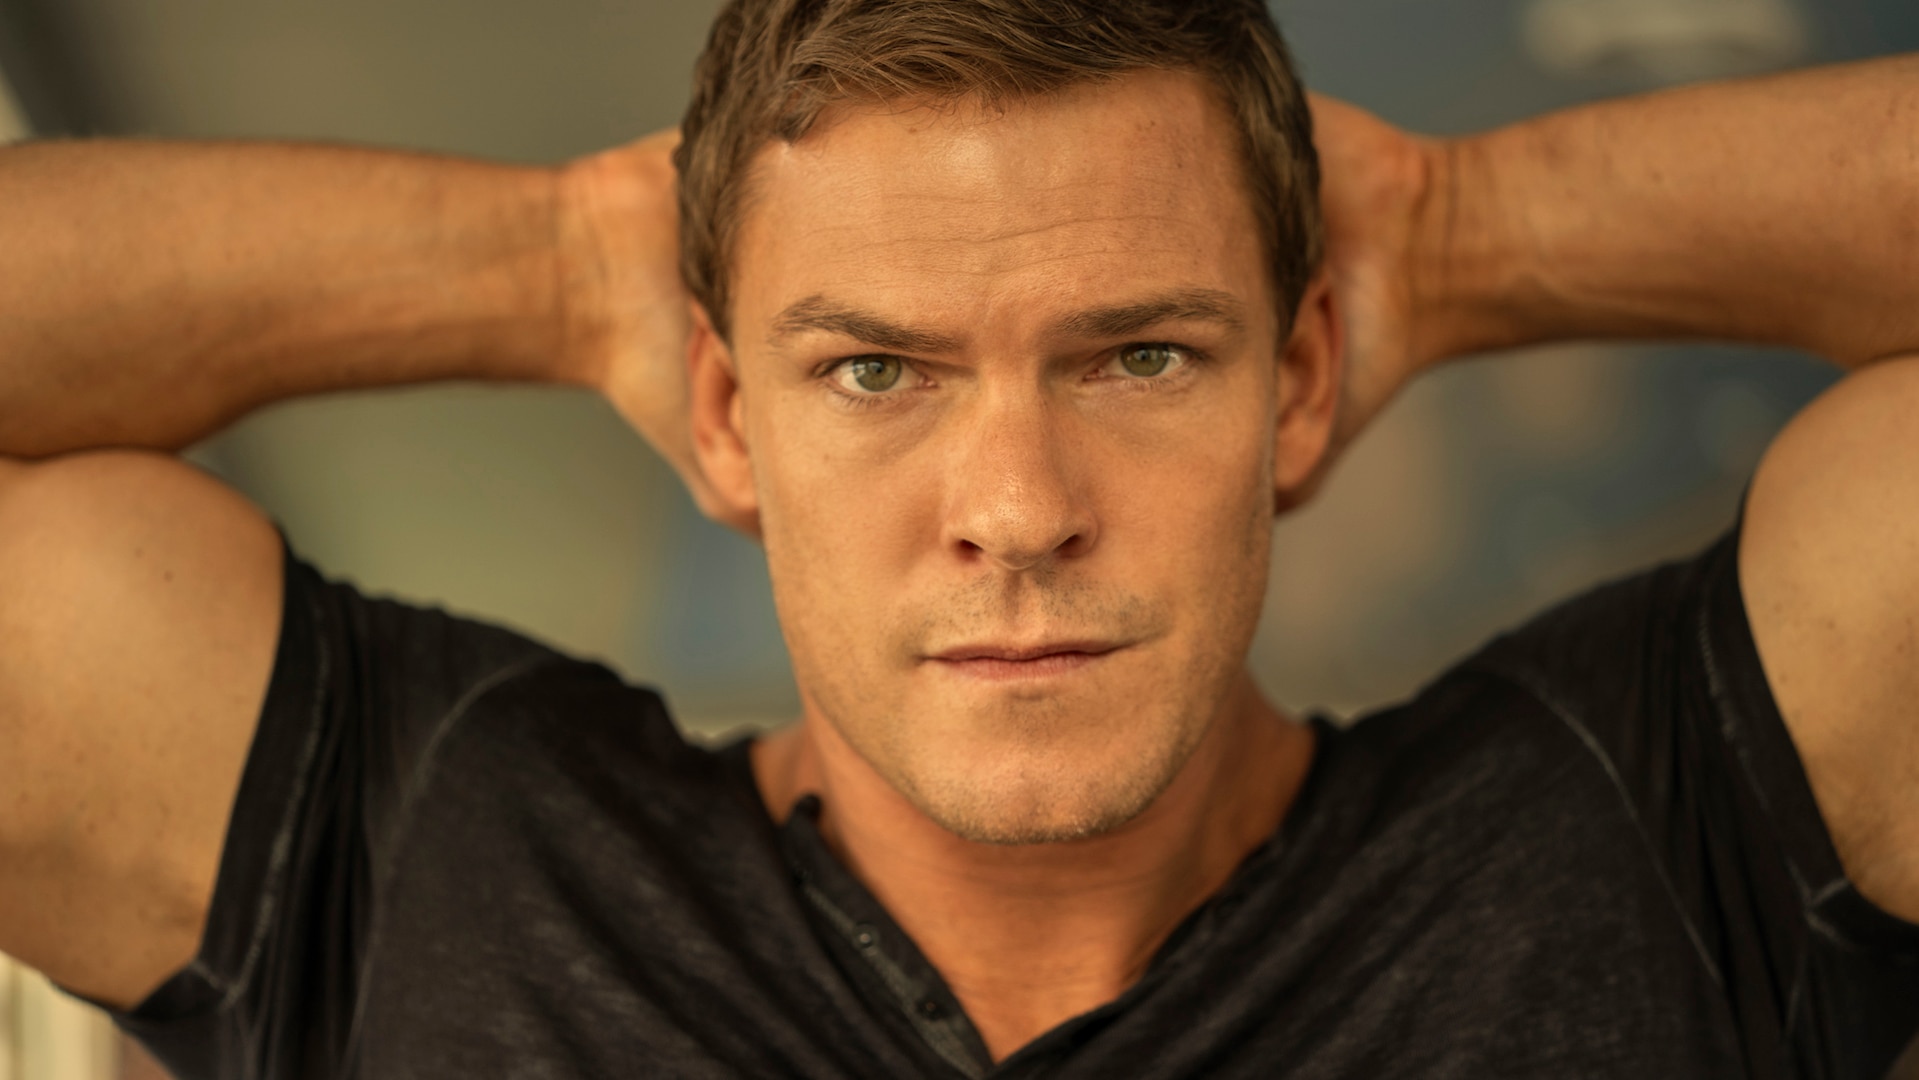 ‘Reacher’ star Alan Ritchson reveals Season 2 will be based on 11th novel in Lee Child series